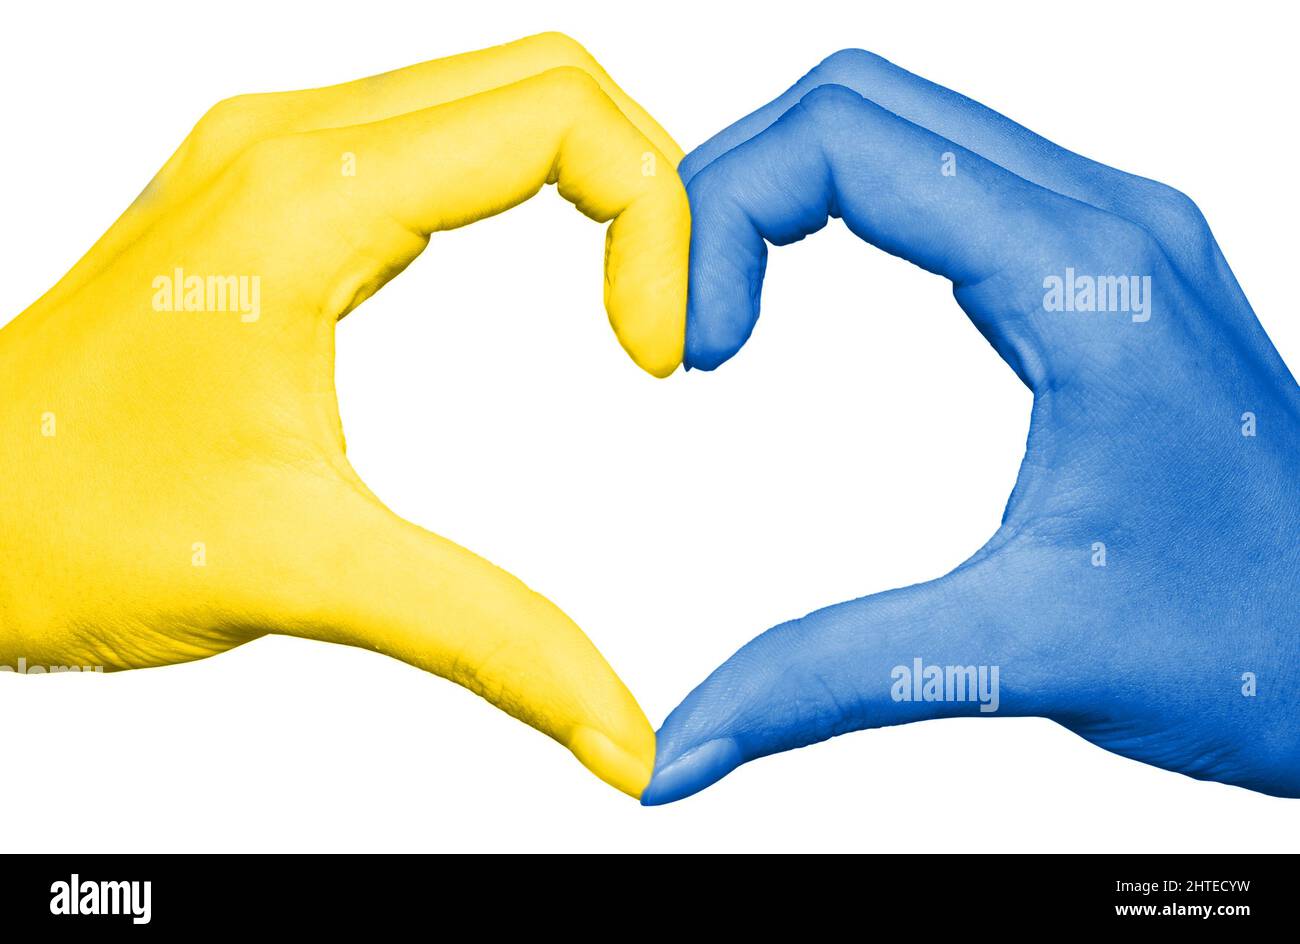 Ukrainian yellow and blue flag on hands forming a heart isolated on white background, Ukraine war support Stock Photo